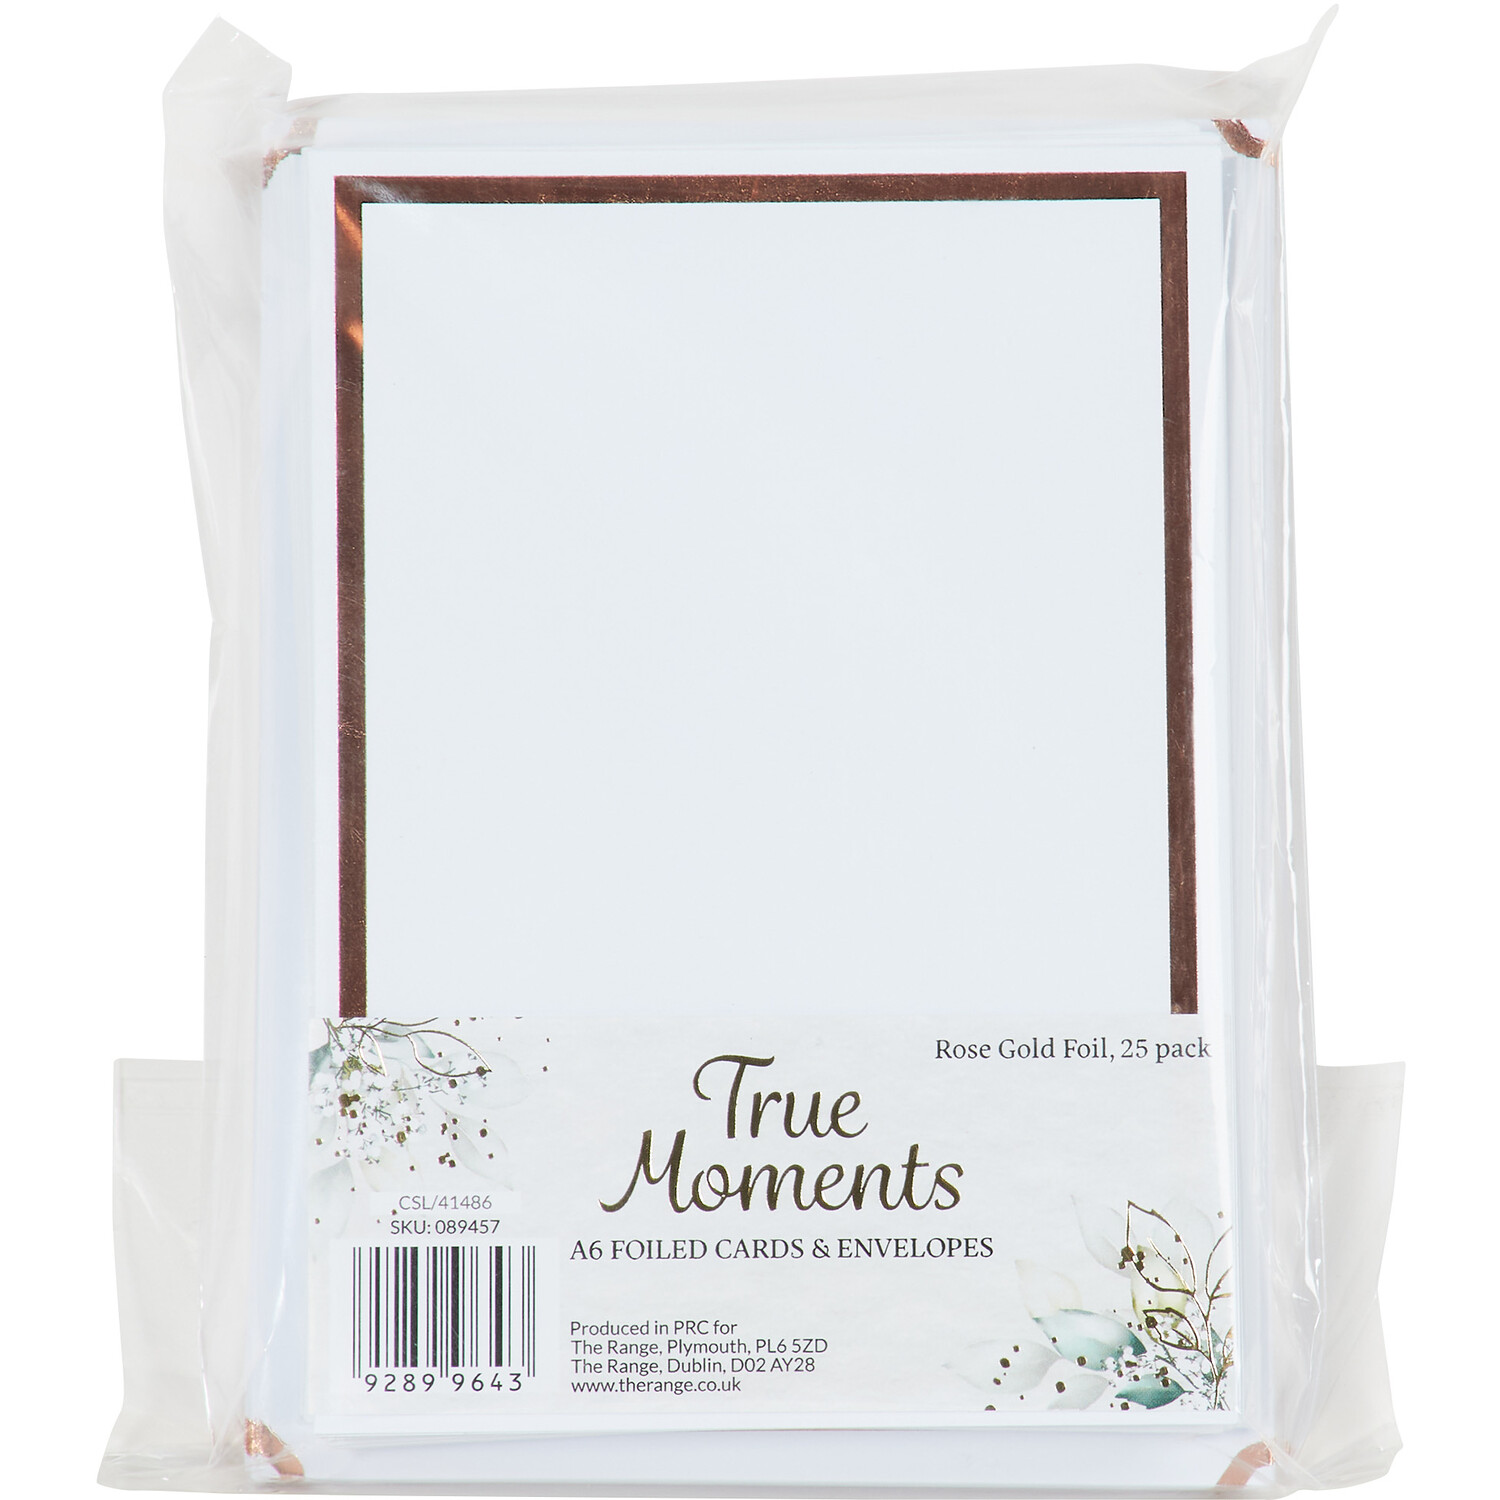 True Moments A6 Foiled Cards and Envelopes Image 1